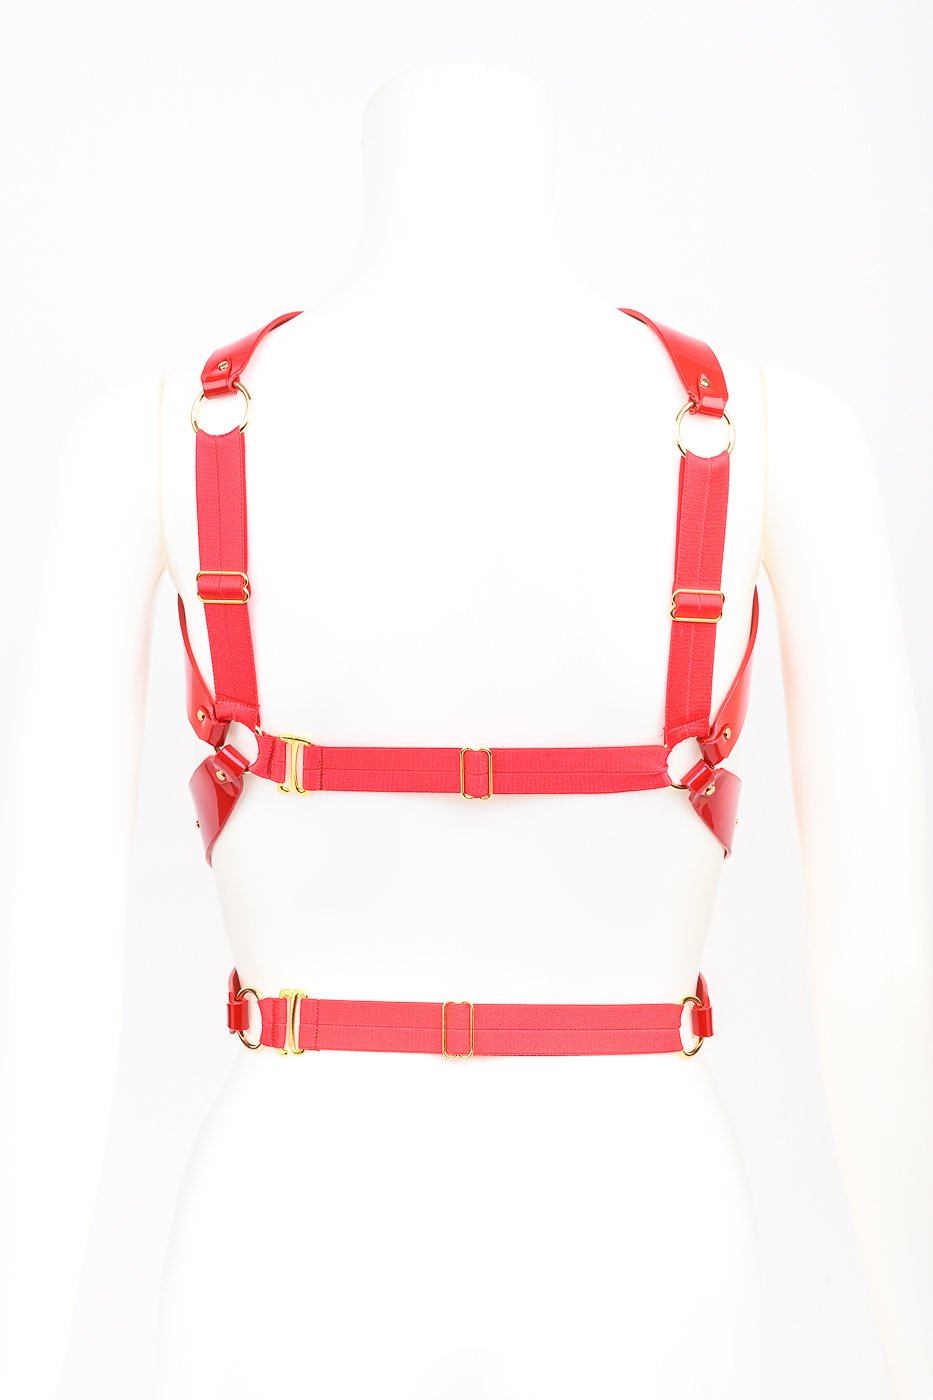 Roja Wrap Harness in red patent leather by Fraulein Kink